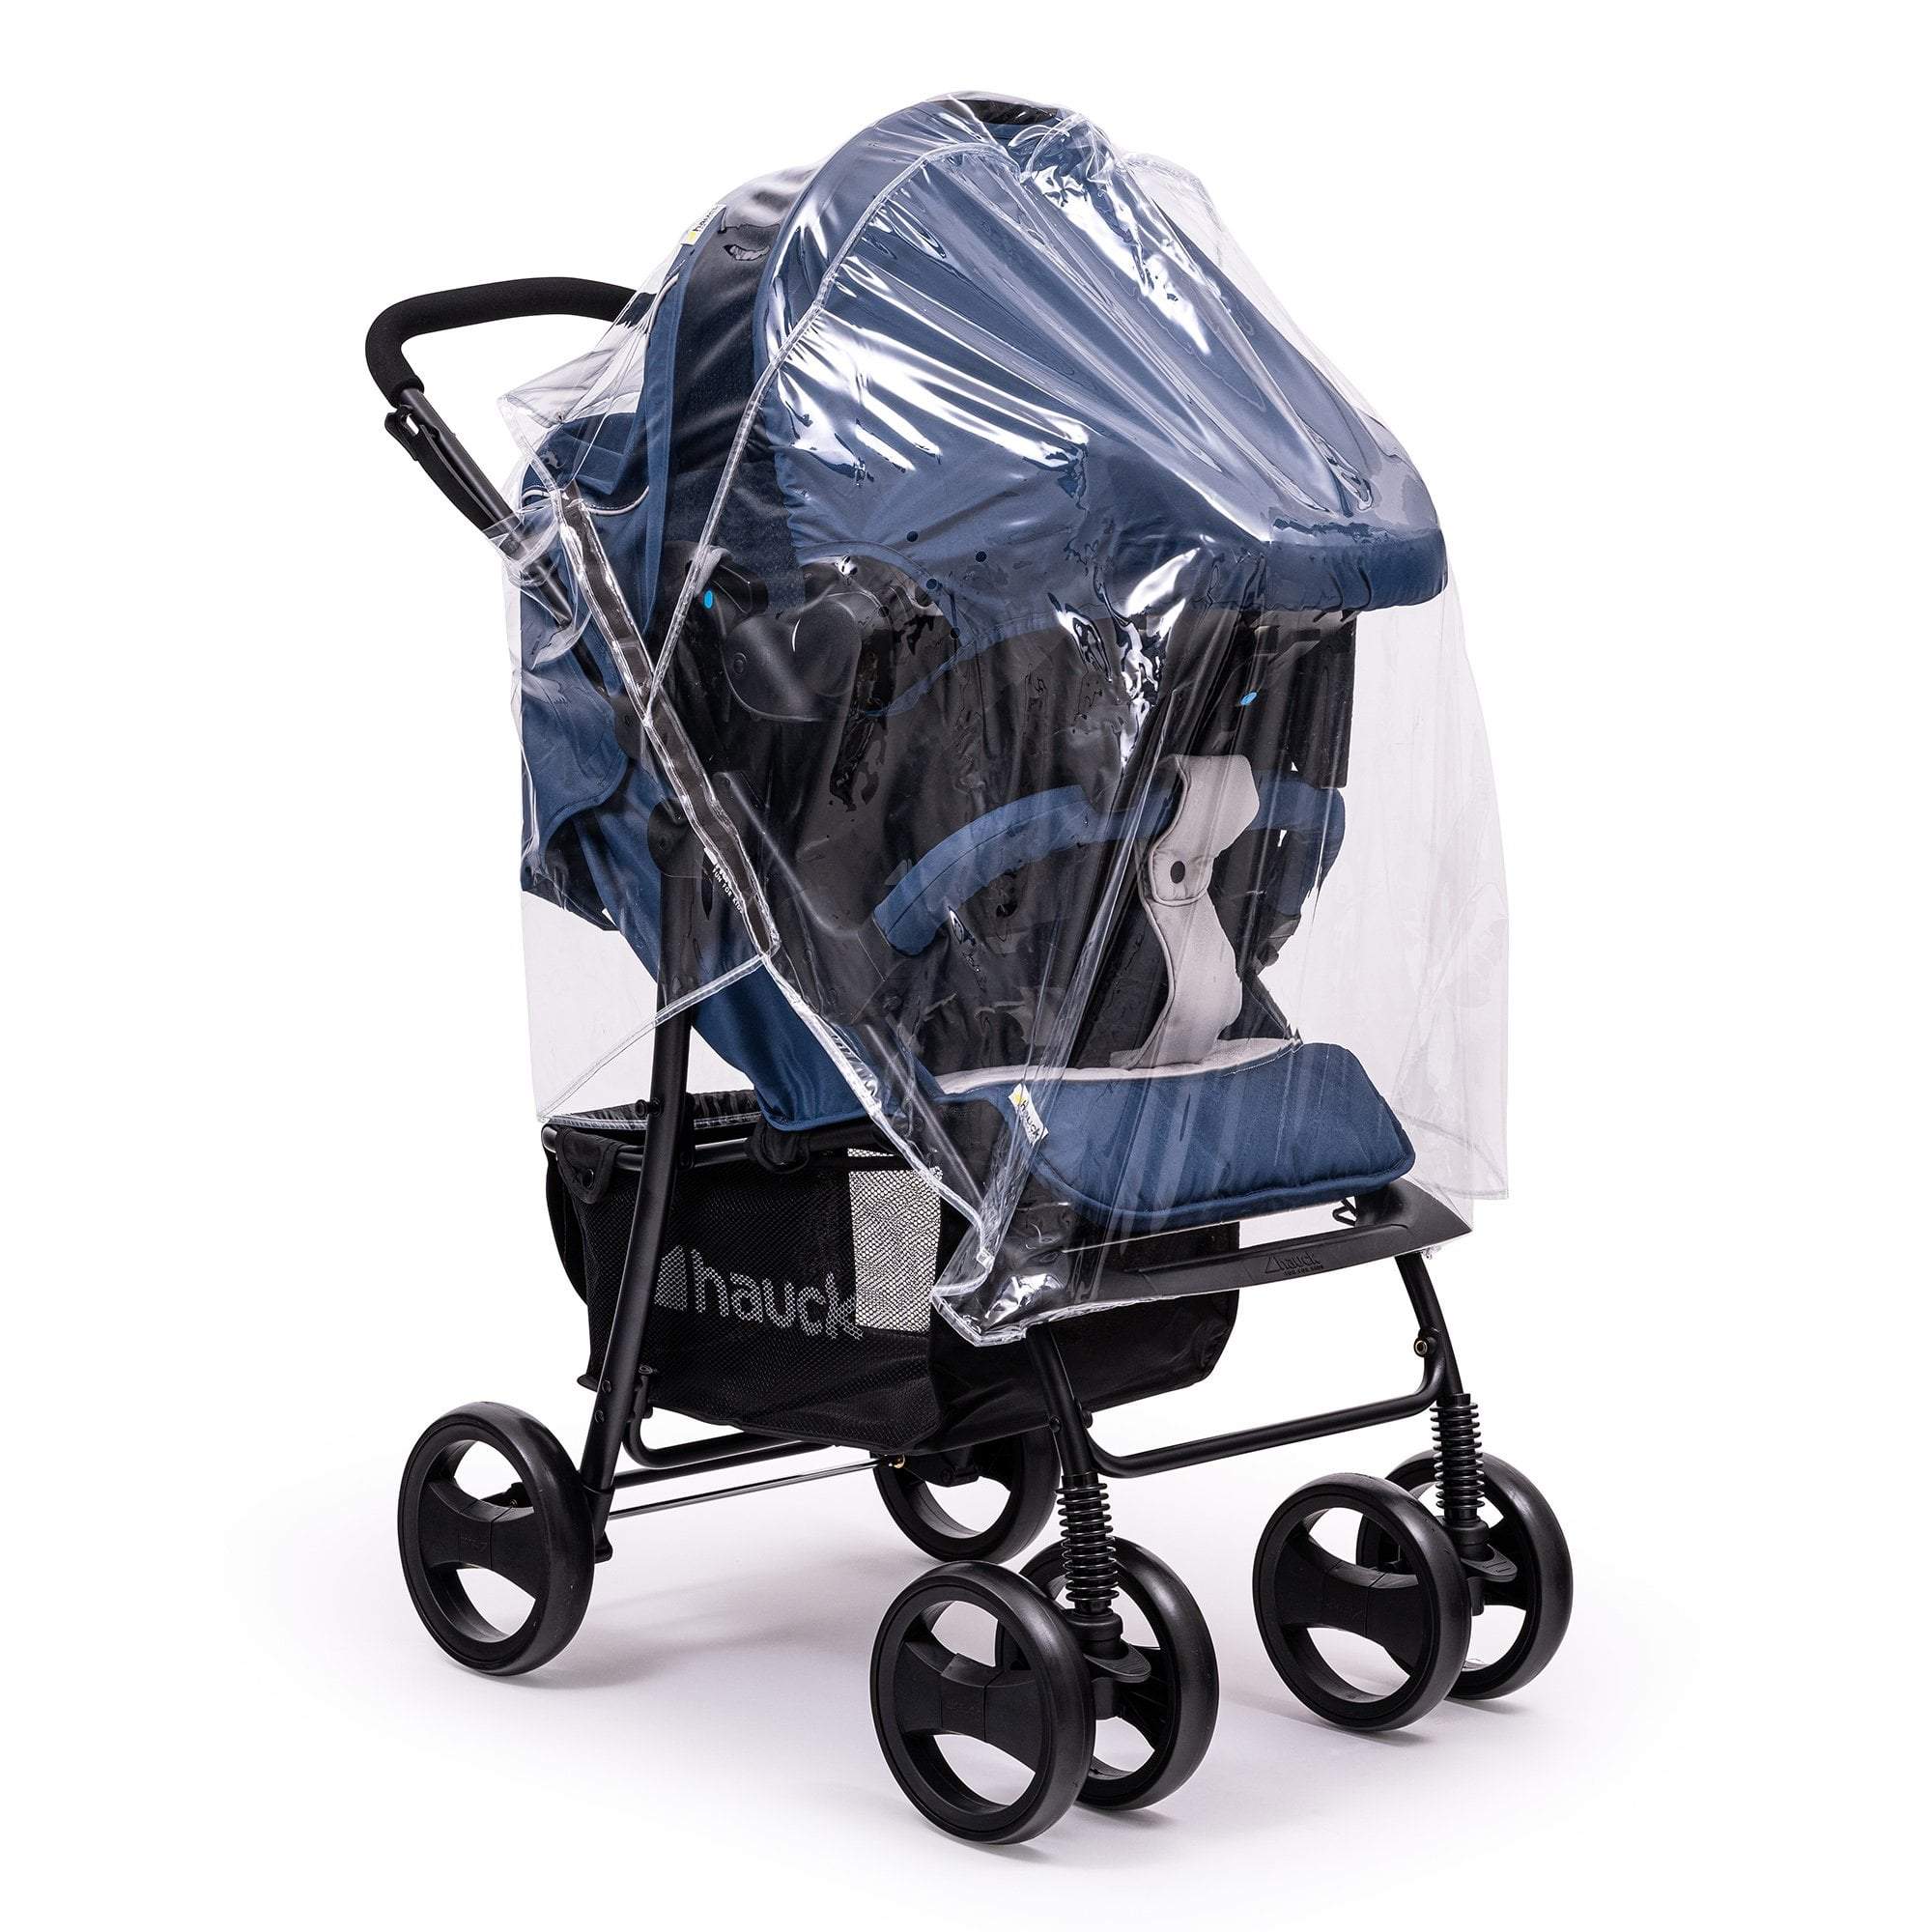 Travel System Raincover Compatible with Baby Trend - Fits All Models - For Your Little One